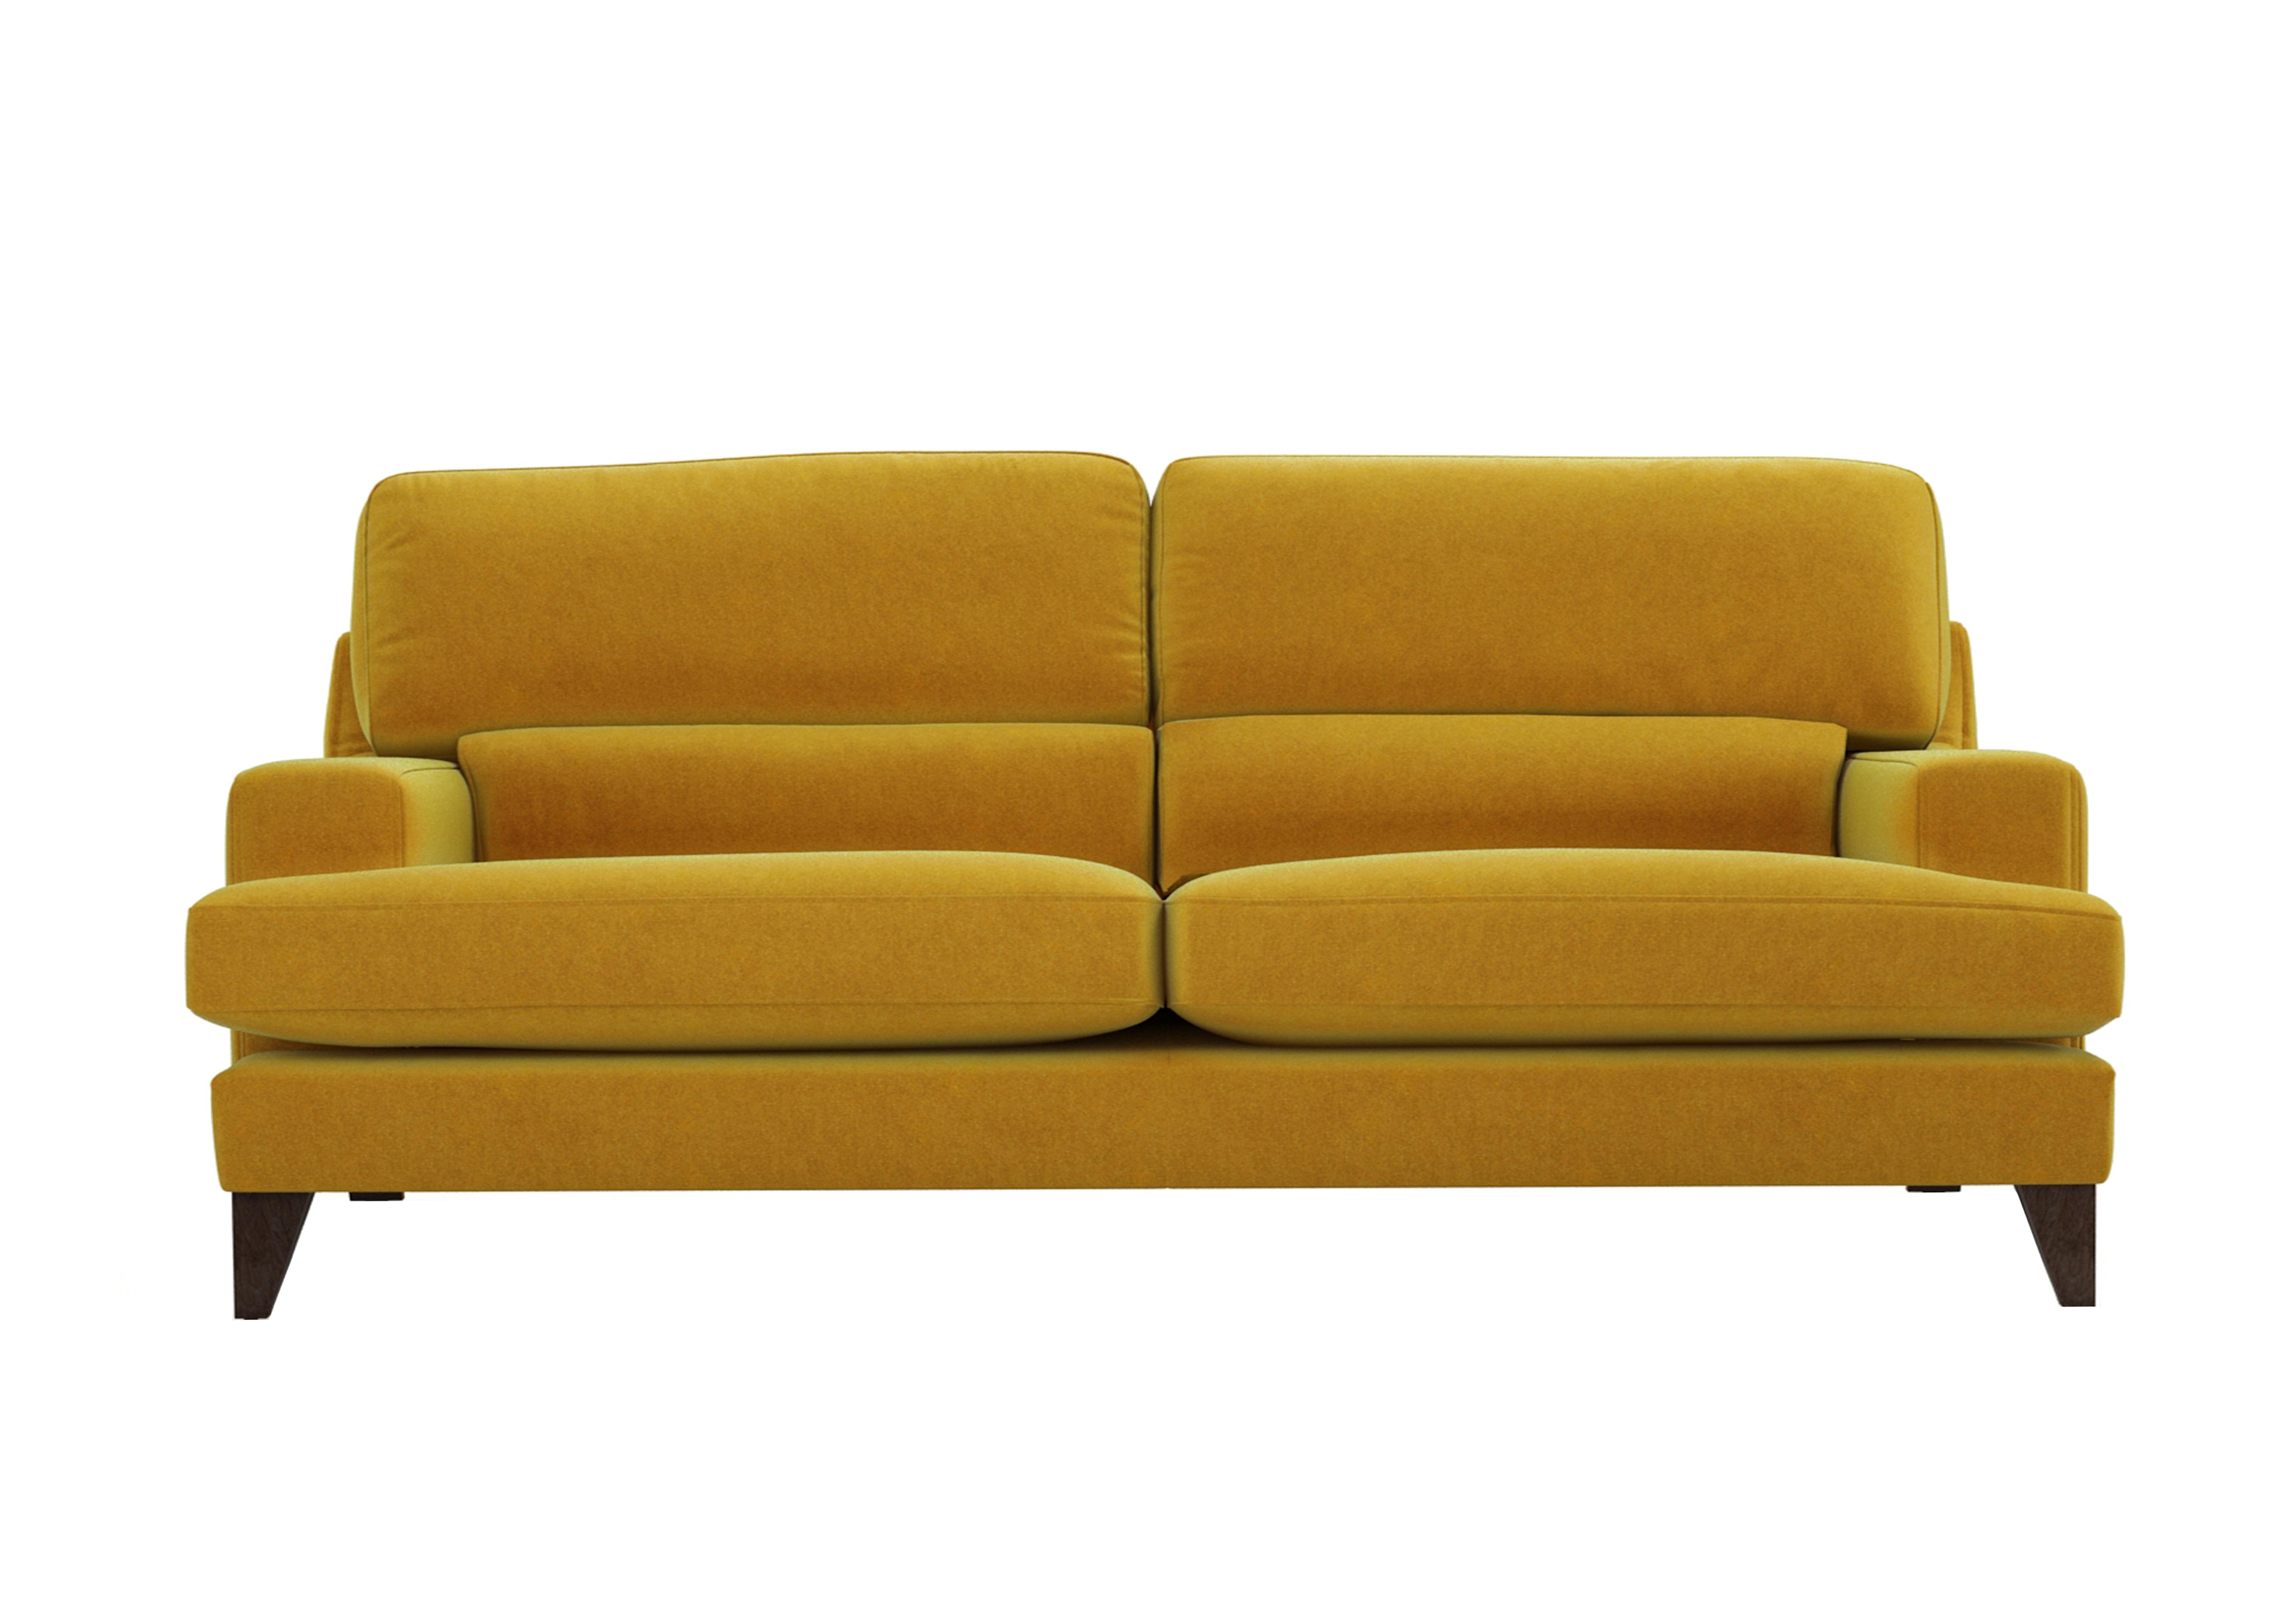 Romilly 4 Seater Fabric Sofa in Gol204 Golden Spice Wa Ft on Furniture Village